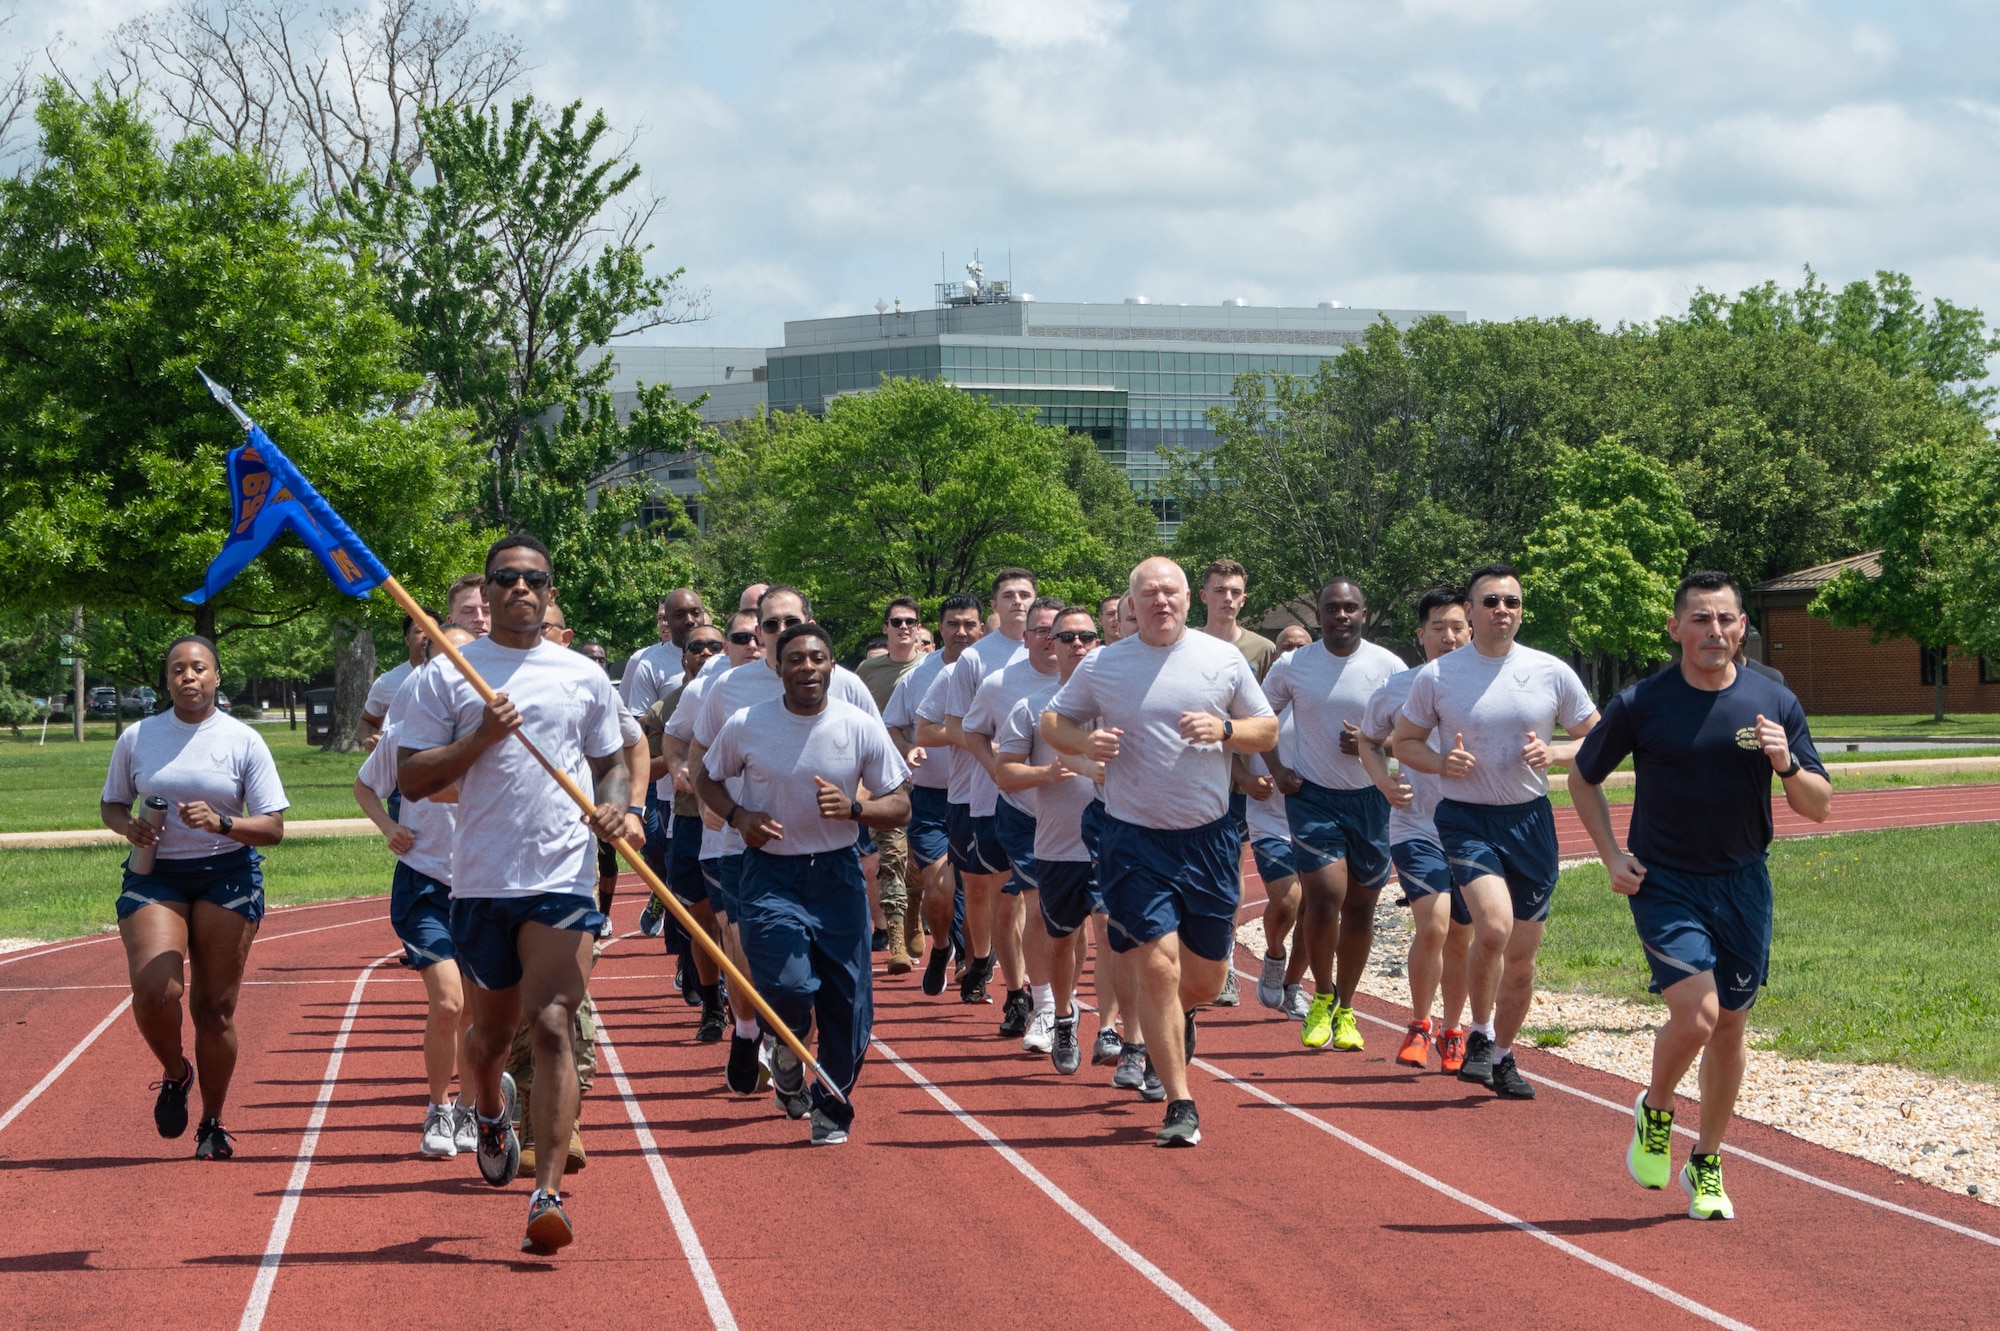 Airmen from the 69th Aerial Port Squadron run in formation at Joint Base Andrews, Md., May 15, 2022, as a part of the annual Port Dawg Memorial Run. The run, which began at Kadena Air Base, Japan, in 2013, honors Air Transportation Airmen who lost their lives over the past year. Seven aerial port Airmen died last year. Members in the career field say "they are 'blocked out,' but not forgotten." (U.S. Air Force Photo by Staff Sgt. Andreaa Phillips)